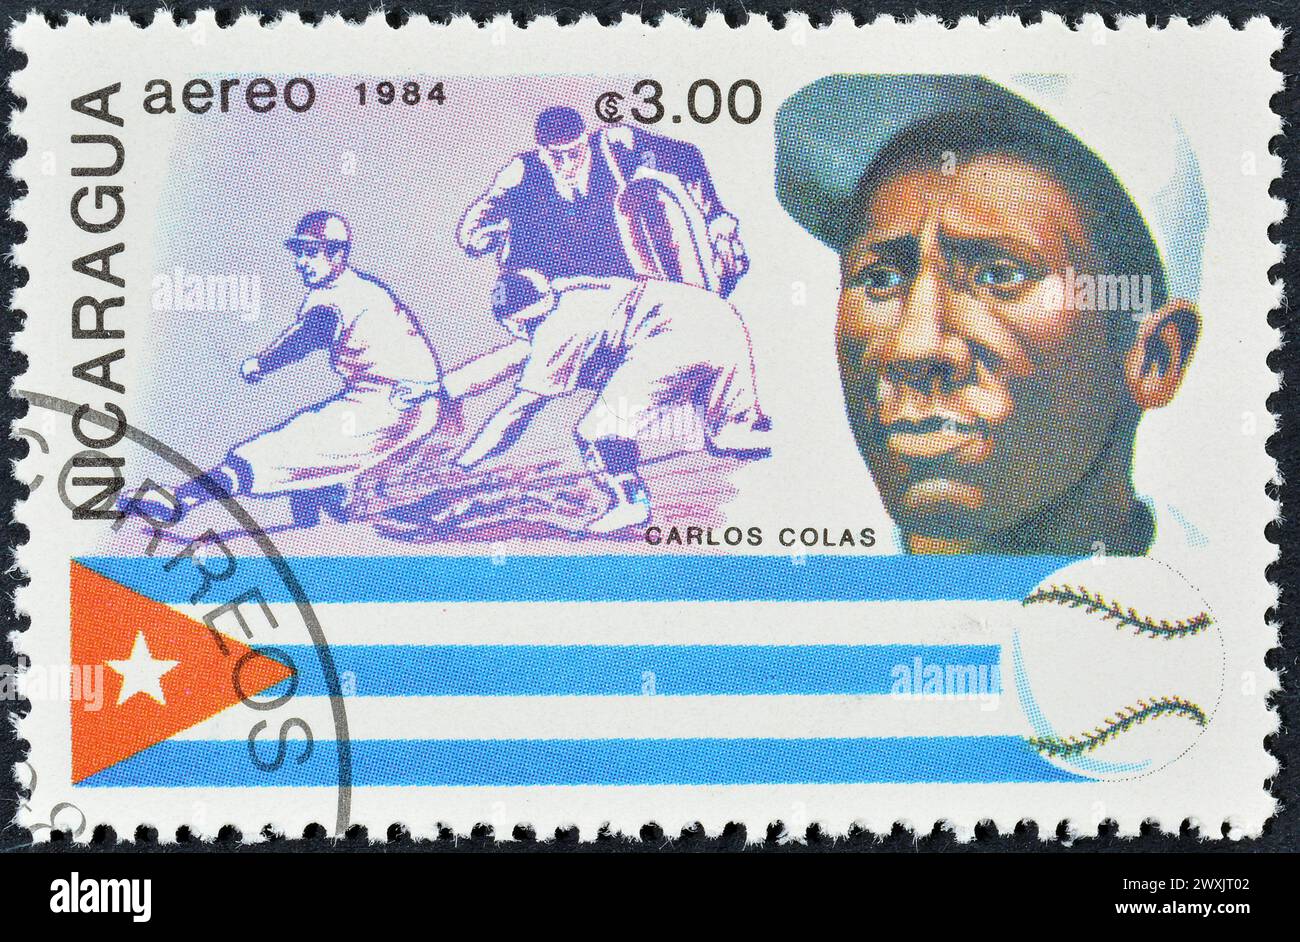 Cancelled postage stamp printed by Nicaragua, that shows Baseball Player Carlos Colas, circa 1984. Stock Photo